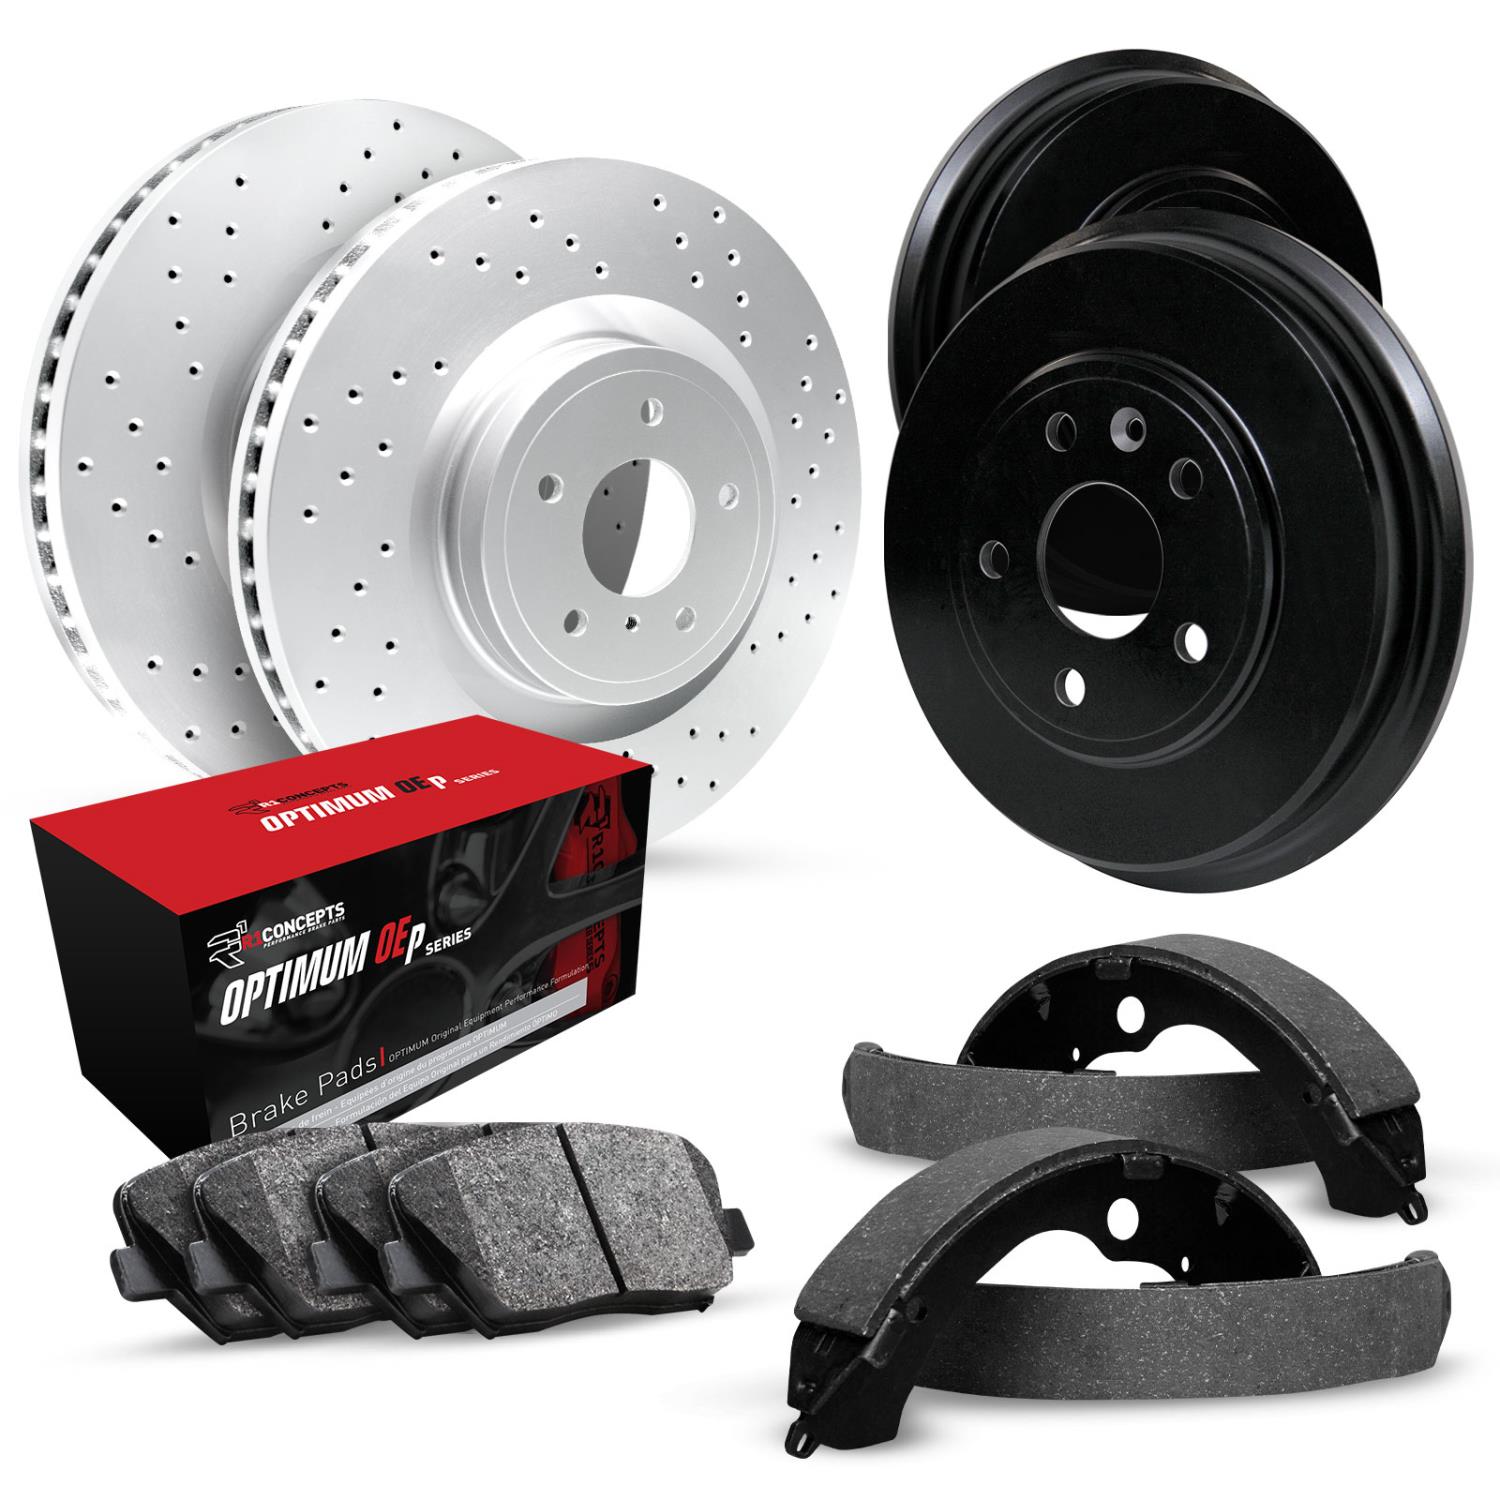 GEO-Carbon Drilled Brake Rotor & Drum Set w/Optimum OE Pads & Shoes, 1981-1991 GM, Position: Front & Rear